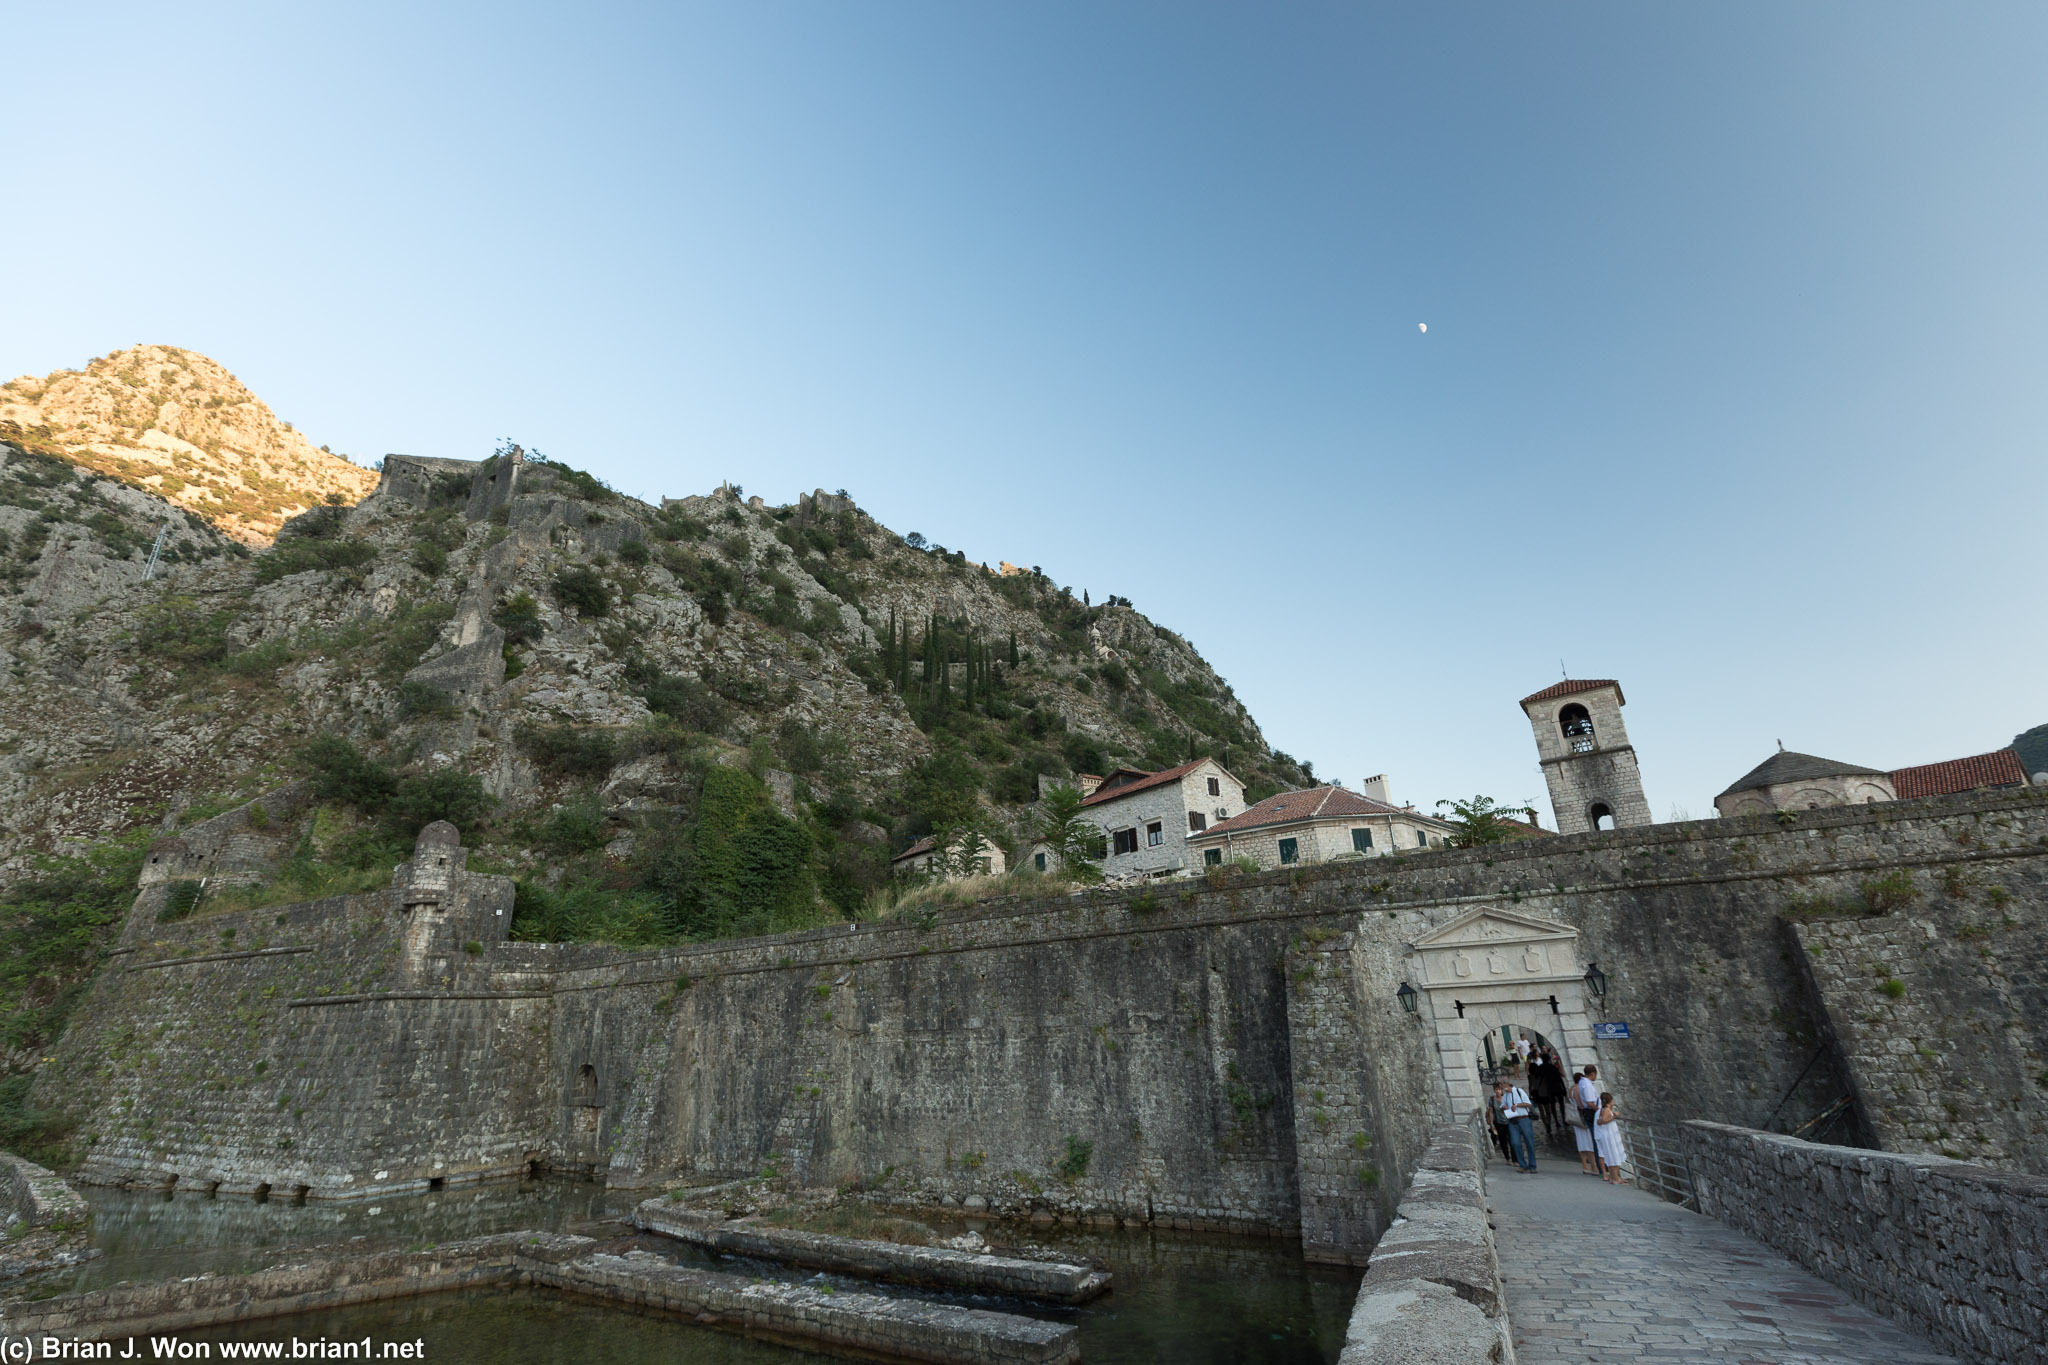 Old town Kotor and the fortress walls running up the mountain.